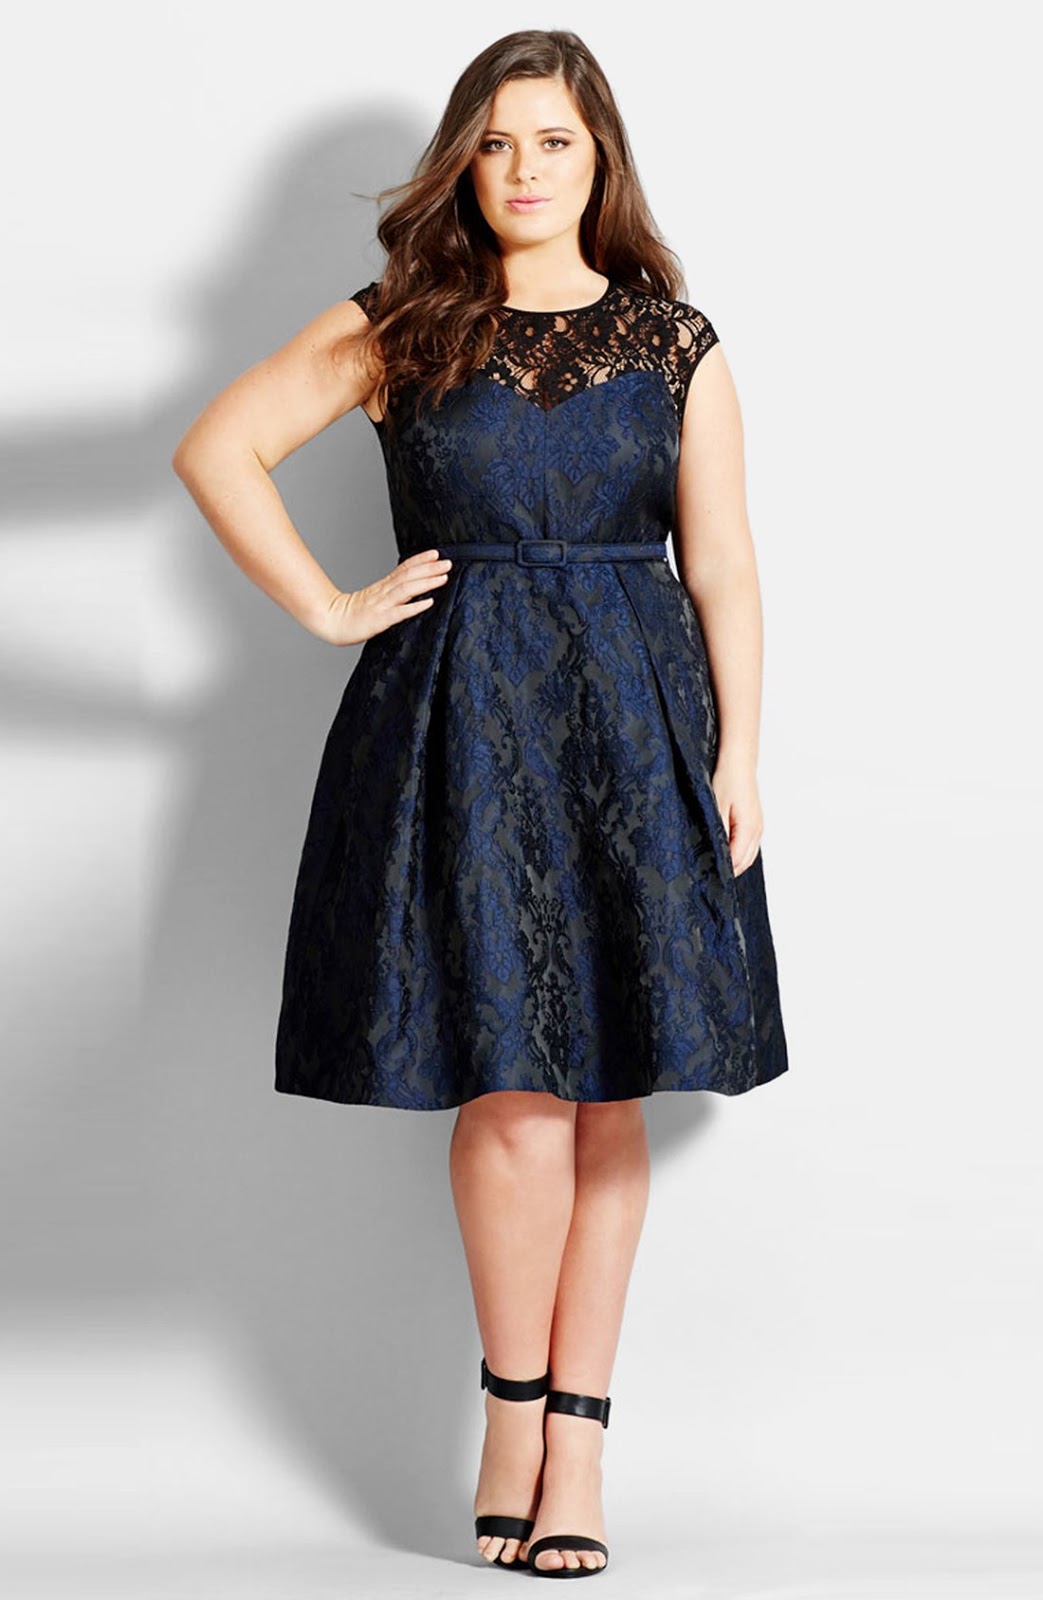 Gorgeous Plus Size Cocktail Dresses Reviews - Wedding, Dresses and Much ...